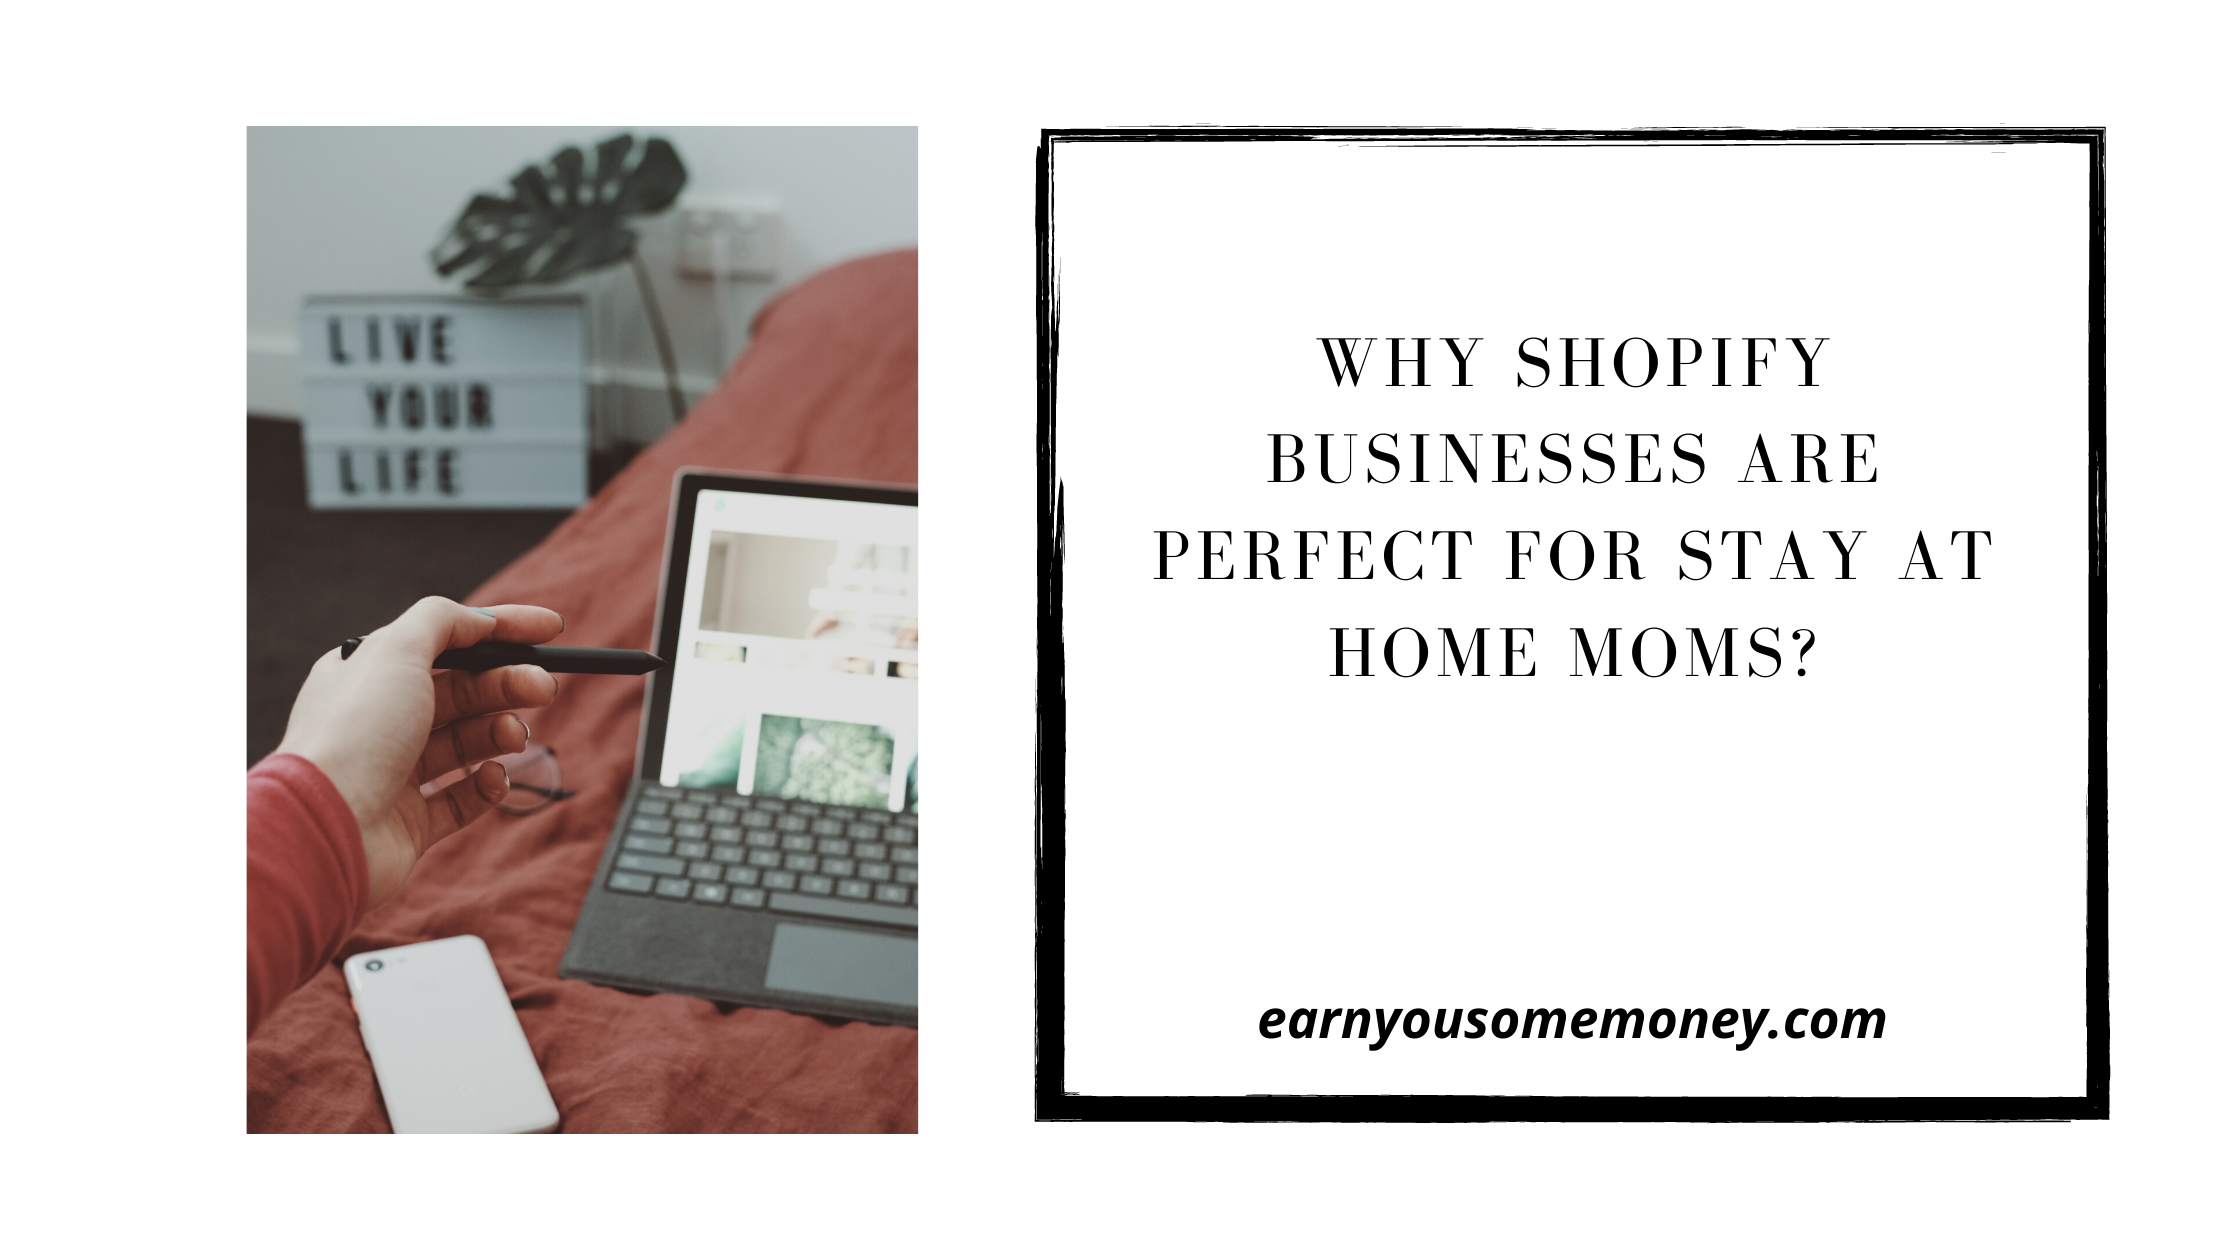 Why Shopify Businesses Are Perfect For Stay At Home Moms